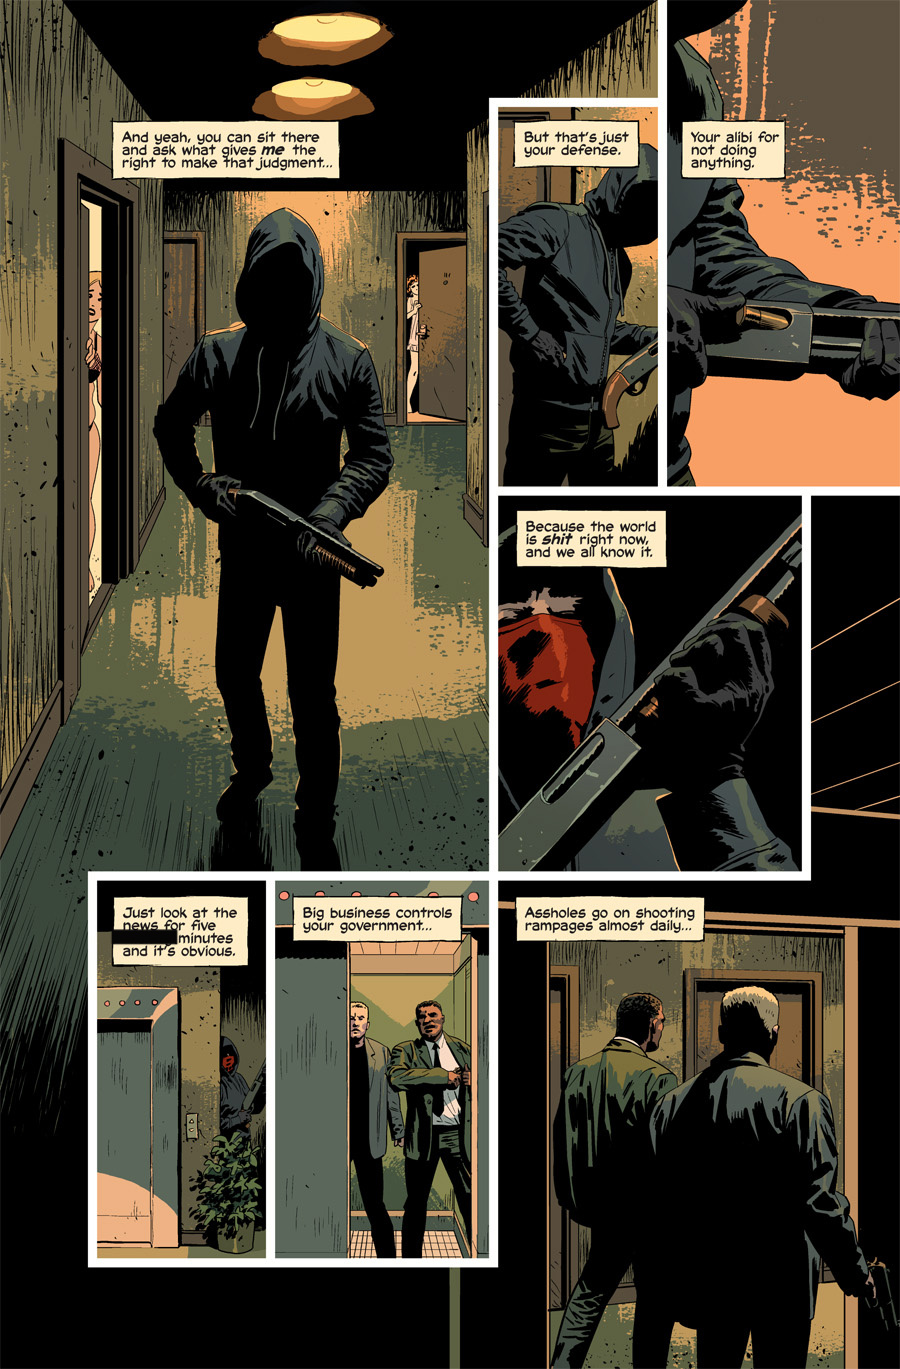 Kill or Be Killed comic book panel showing a hooded man with a shotgun approaching two presumed criminals.